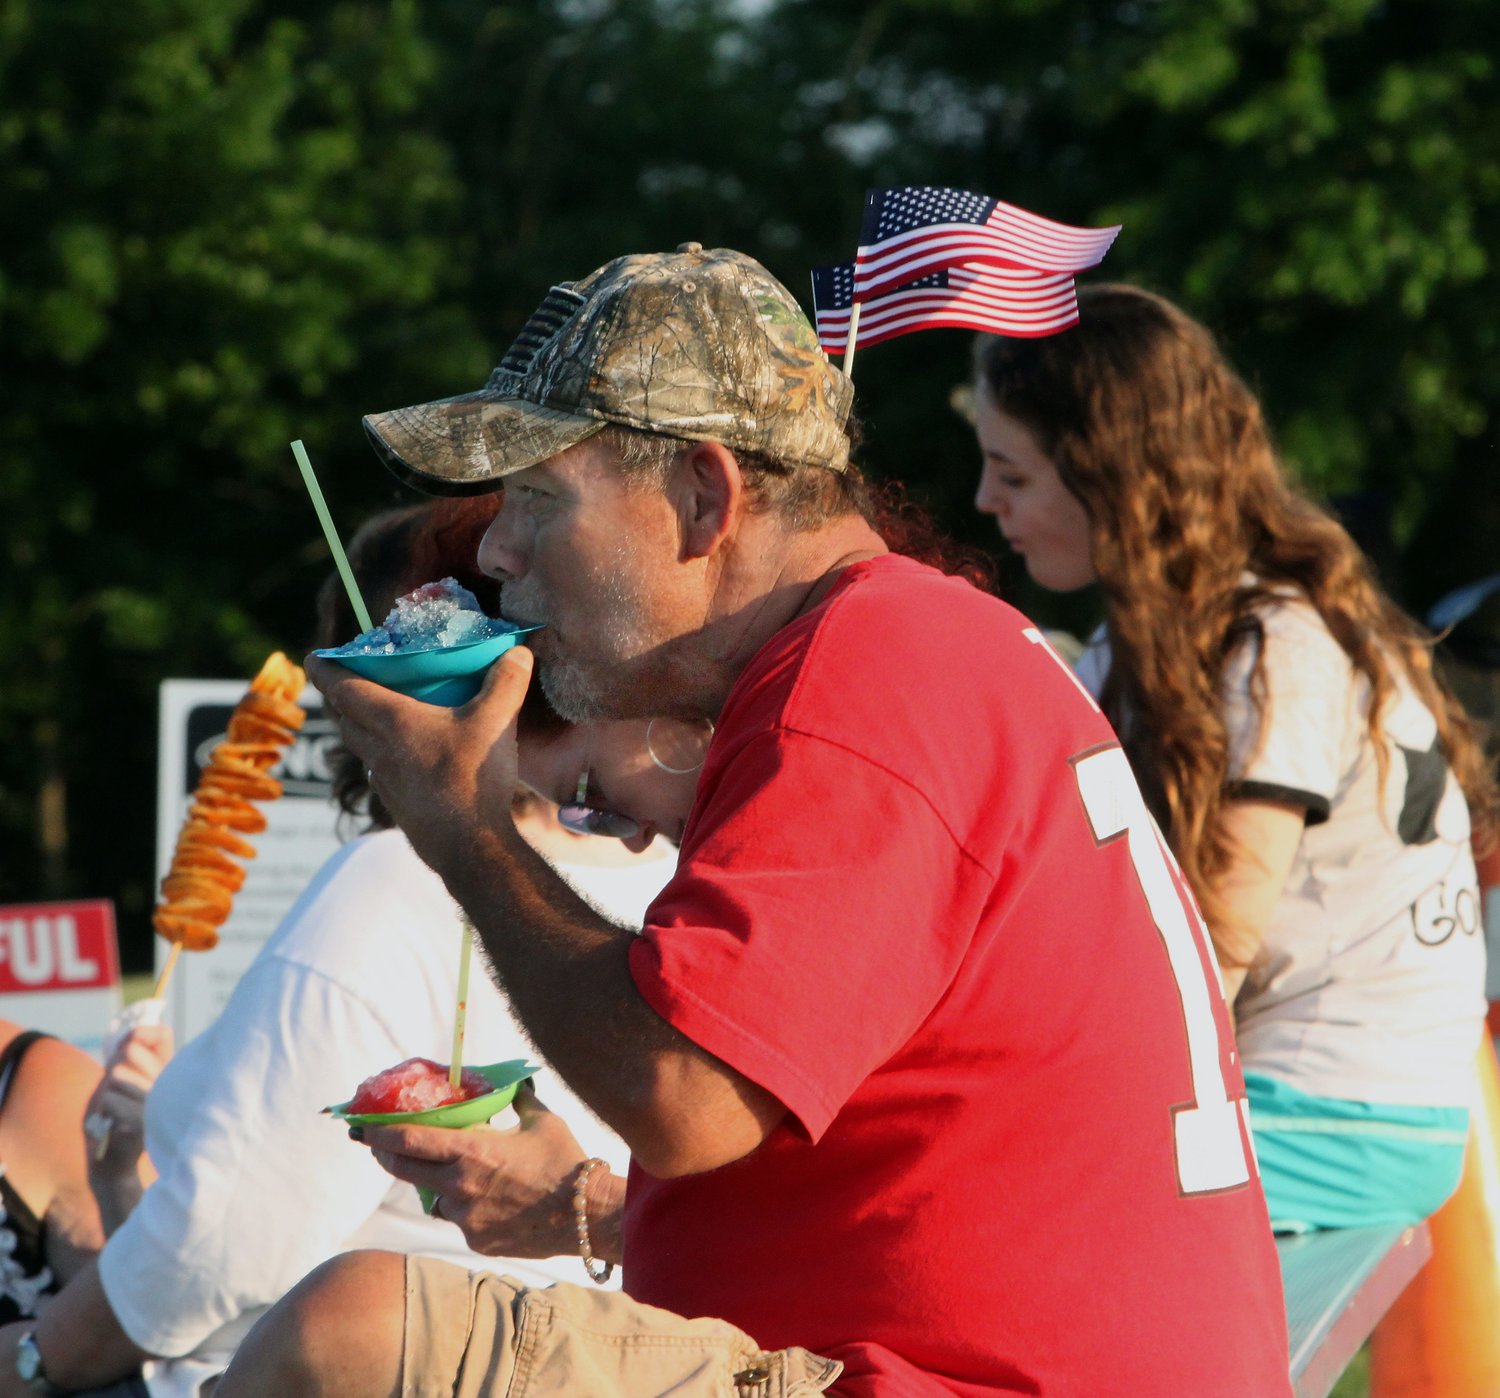 Eating a refreshing snow cone was the choice of this man that attended the 2020 Moberly July 4 Extravaganza held at Howard Hils Athletic Complex. The annual event returns to this site Sunday, July 4 with a $28,000 fireworks showcase to culminate the day's festivities for the public.